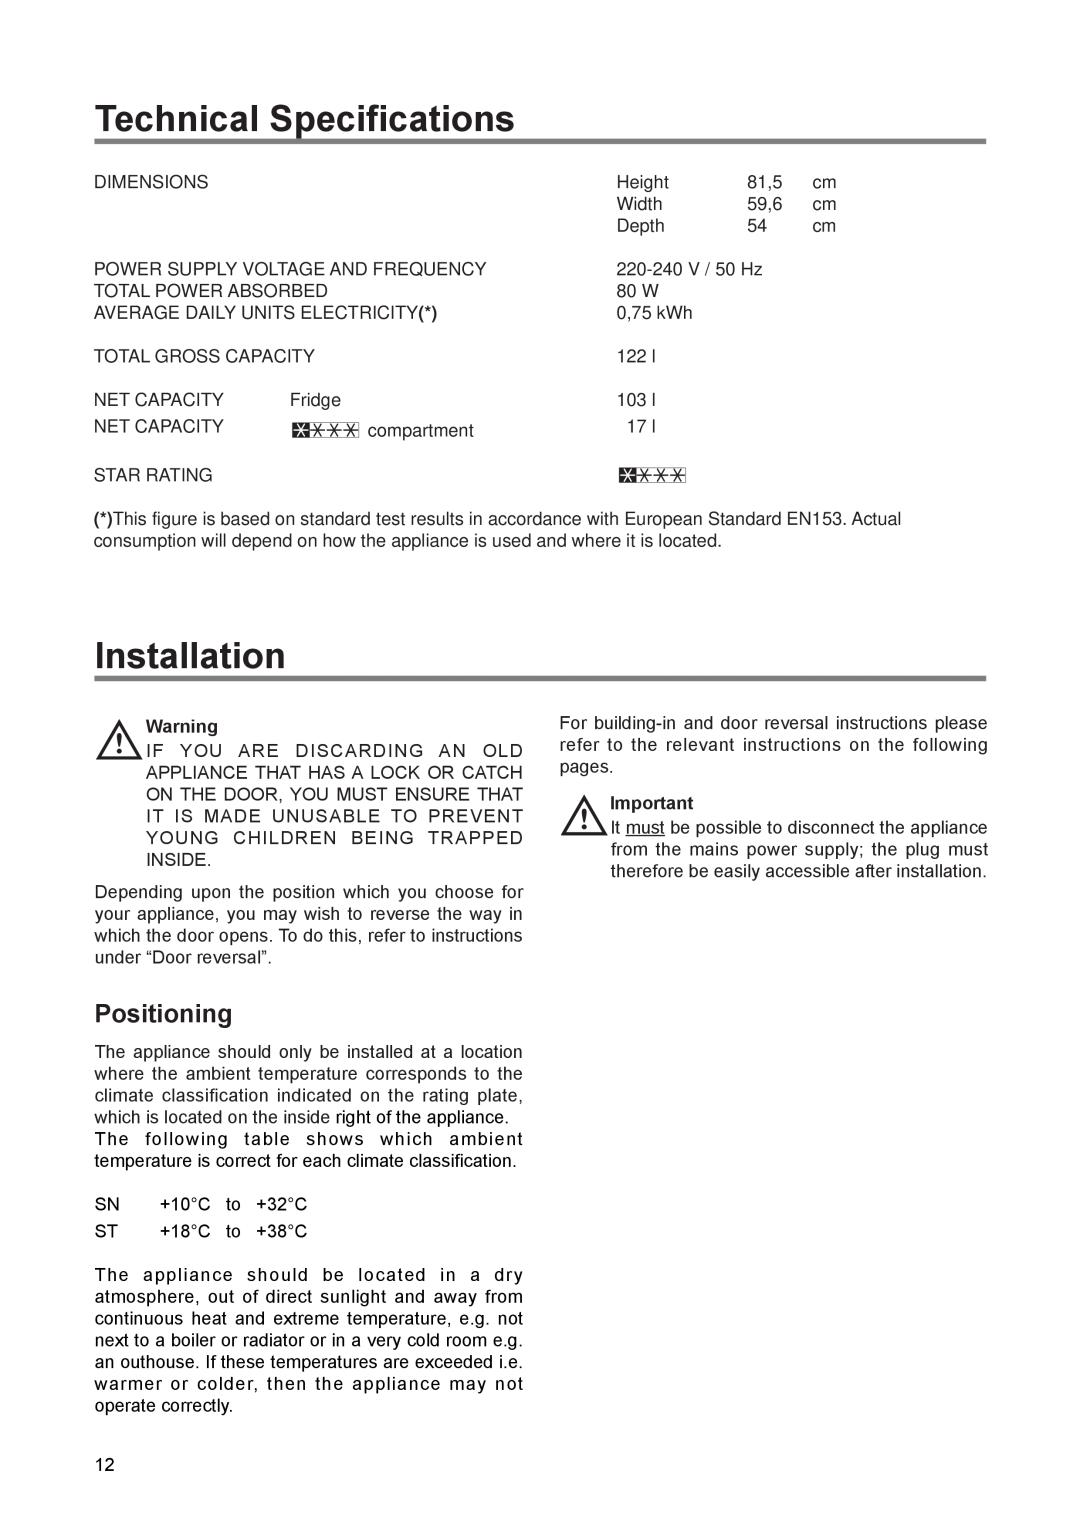 Electrolux FRF 120 manual Technical Specifications, Installation, Positioning 